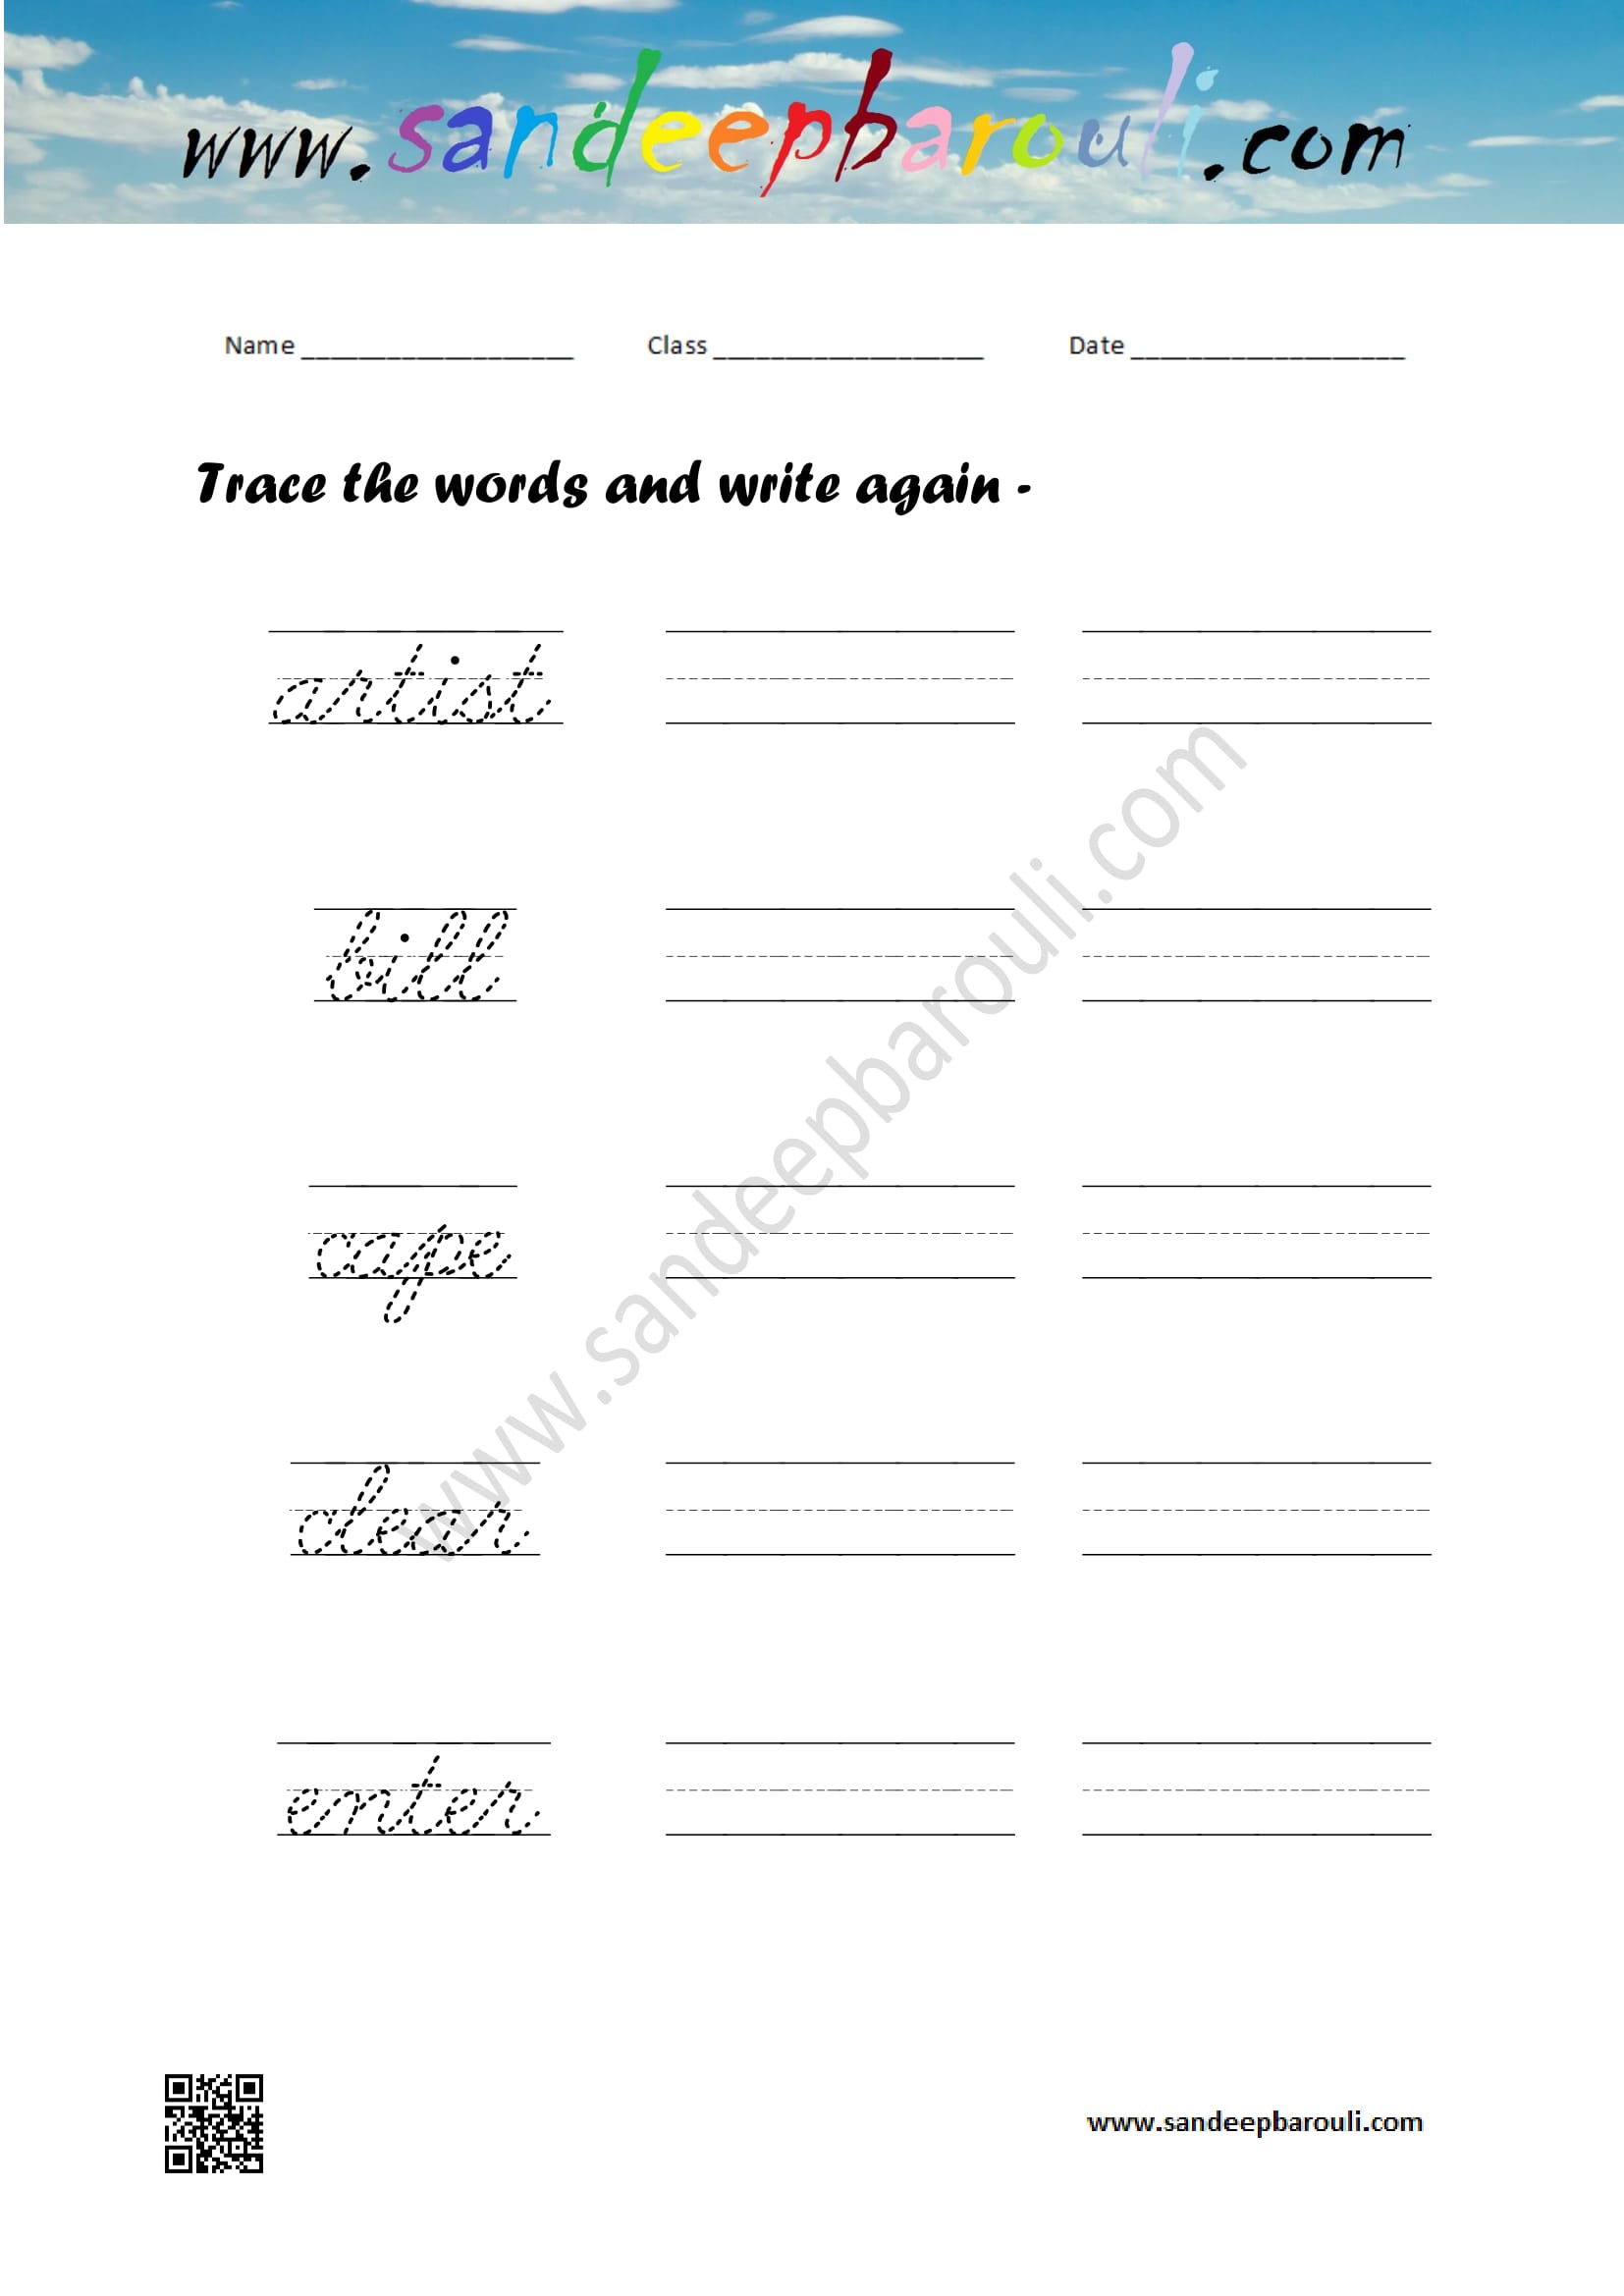 Cursive writing worksheet – trace the words and write again (66)